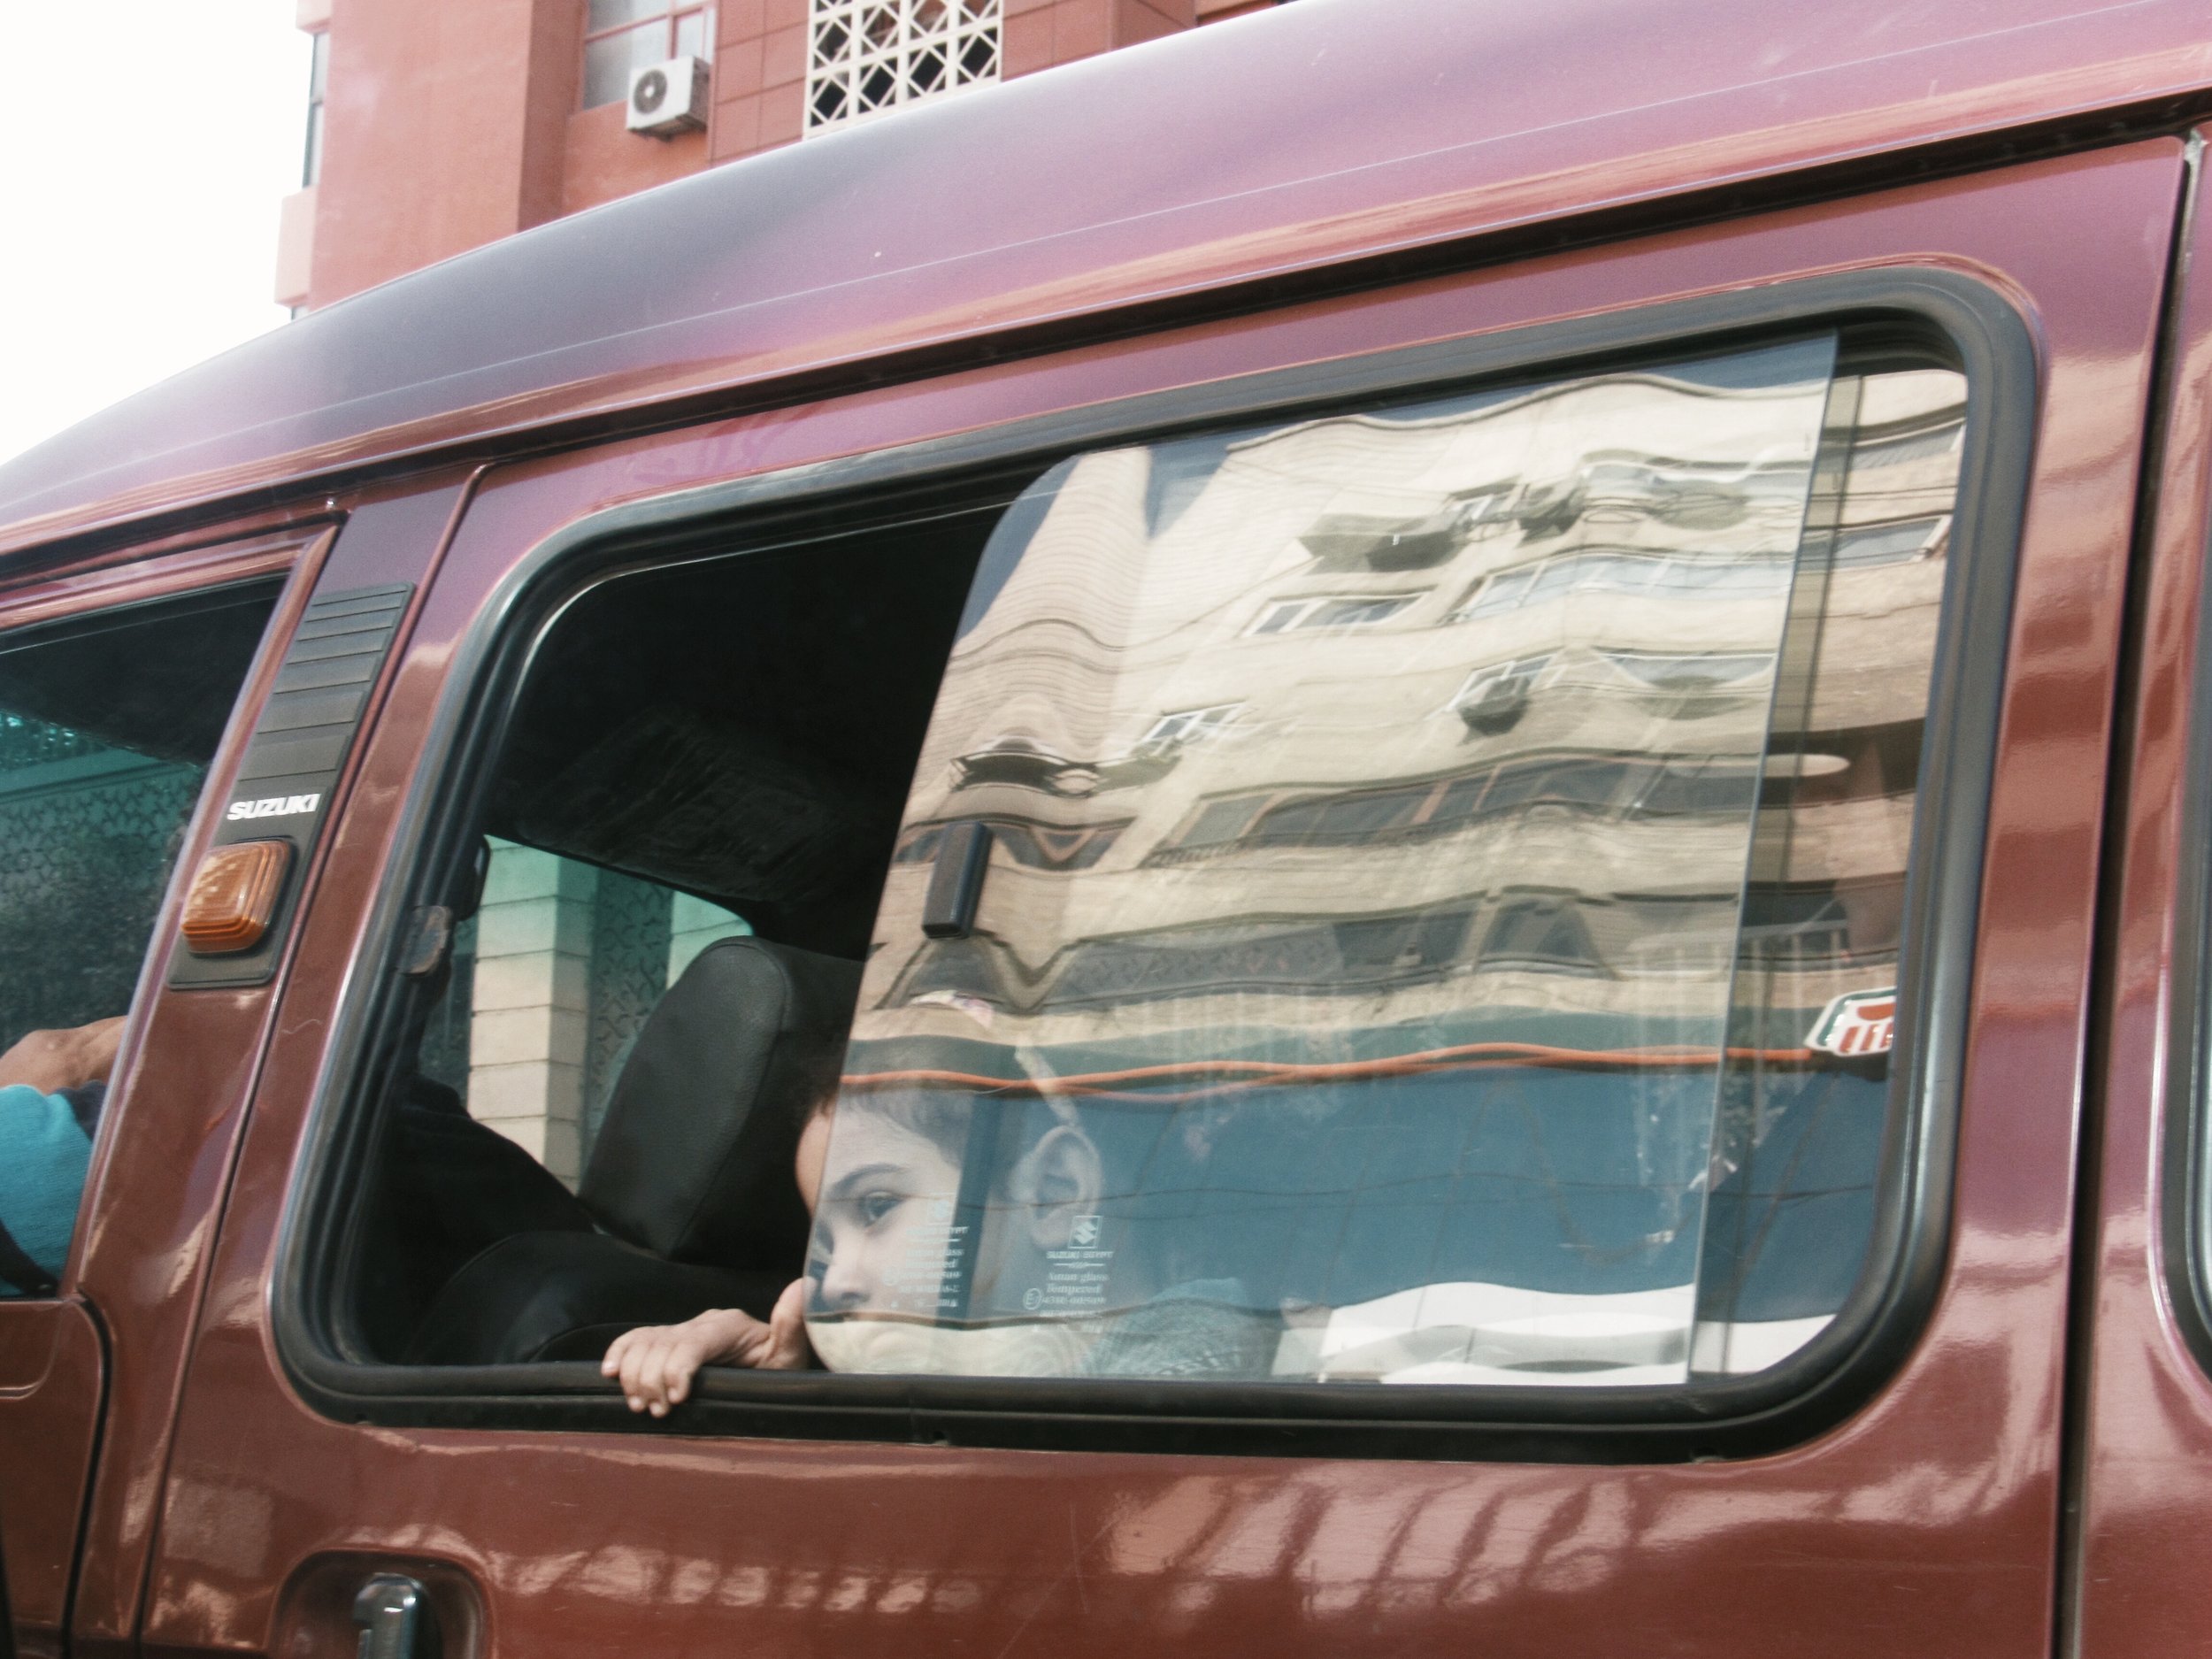 Girl in Traffic | December 17, 2018 Cairo, Egypt | A young girl with a wistful look upon her face peers her eyes out of a red micro-bus.